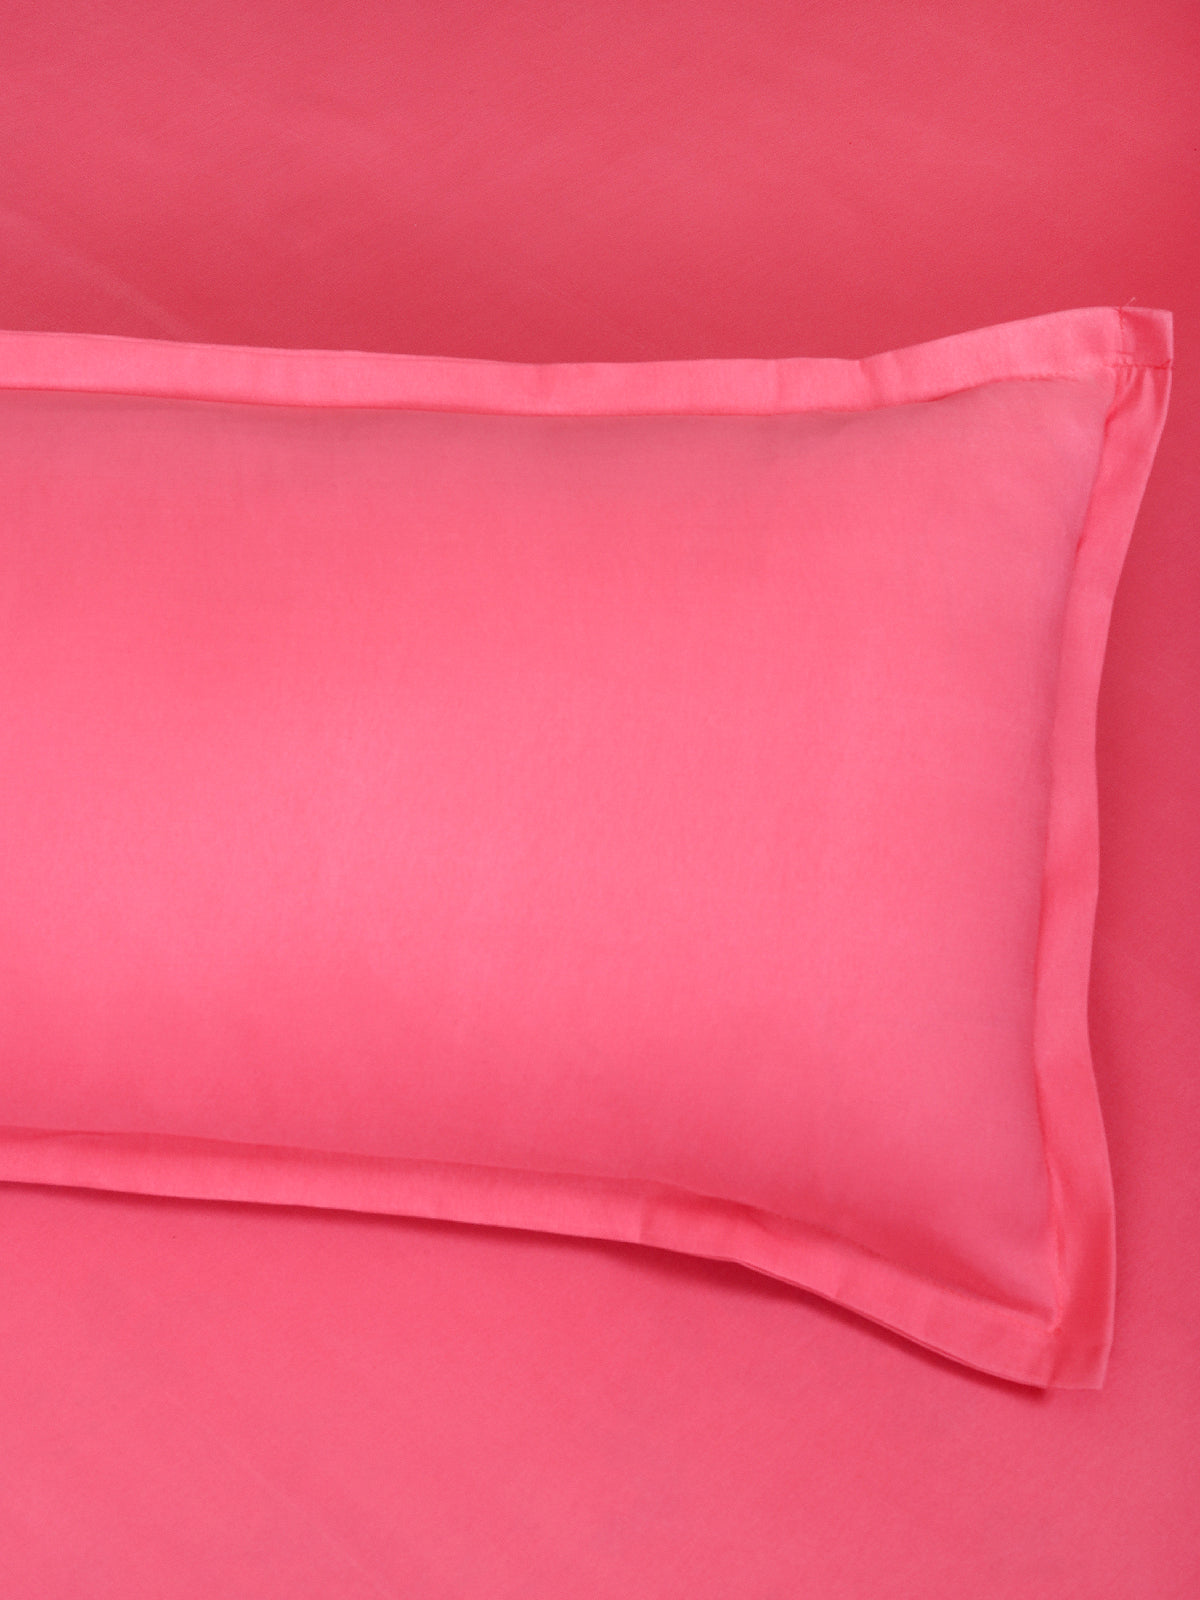 ROMEE Pink Solid 150 TC King Bedsheet with 2 Pillow Covers